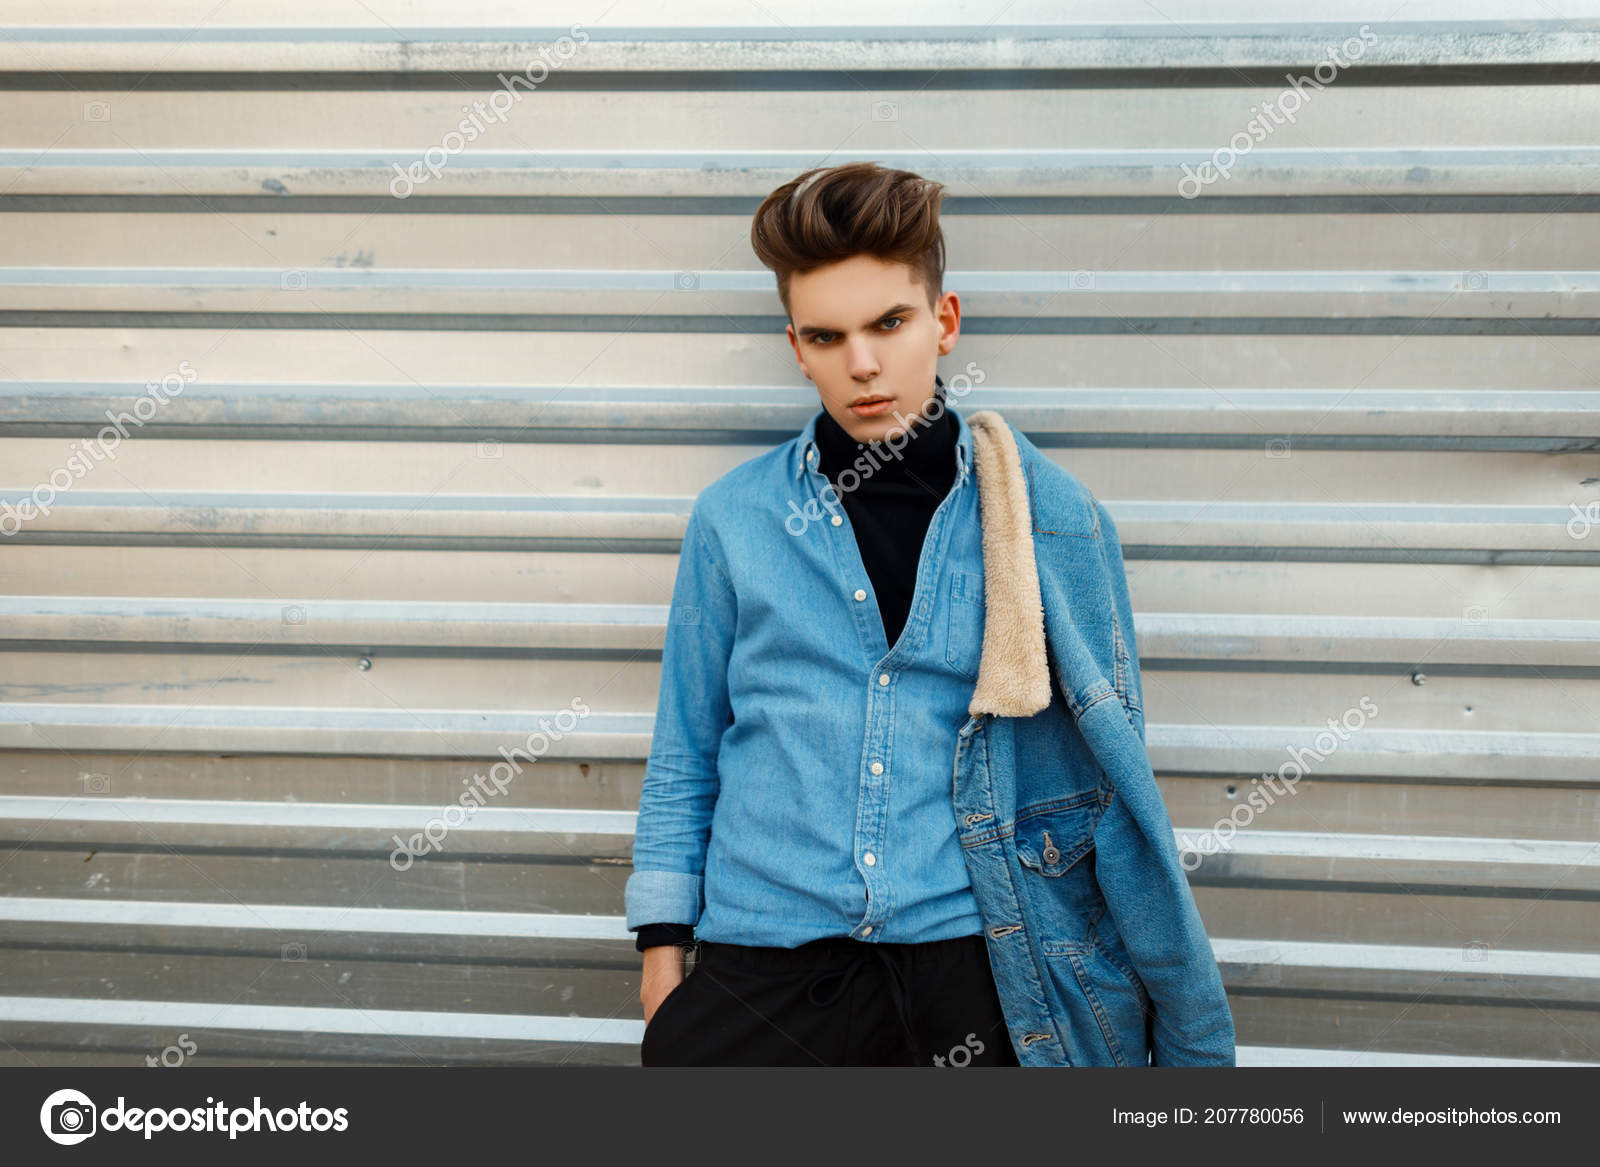 Young man wearing winter clothes in the street. Young bearded guy with  modern hairstyle with coat, Stock Photo, Picture And Royalty Free Image.  Pic. NGR-ING-18944-05039 | agefotostock